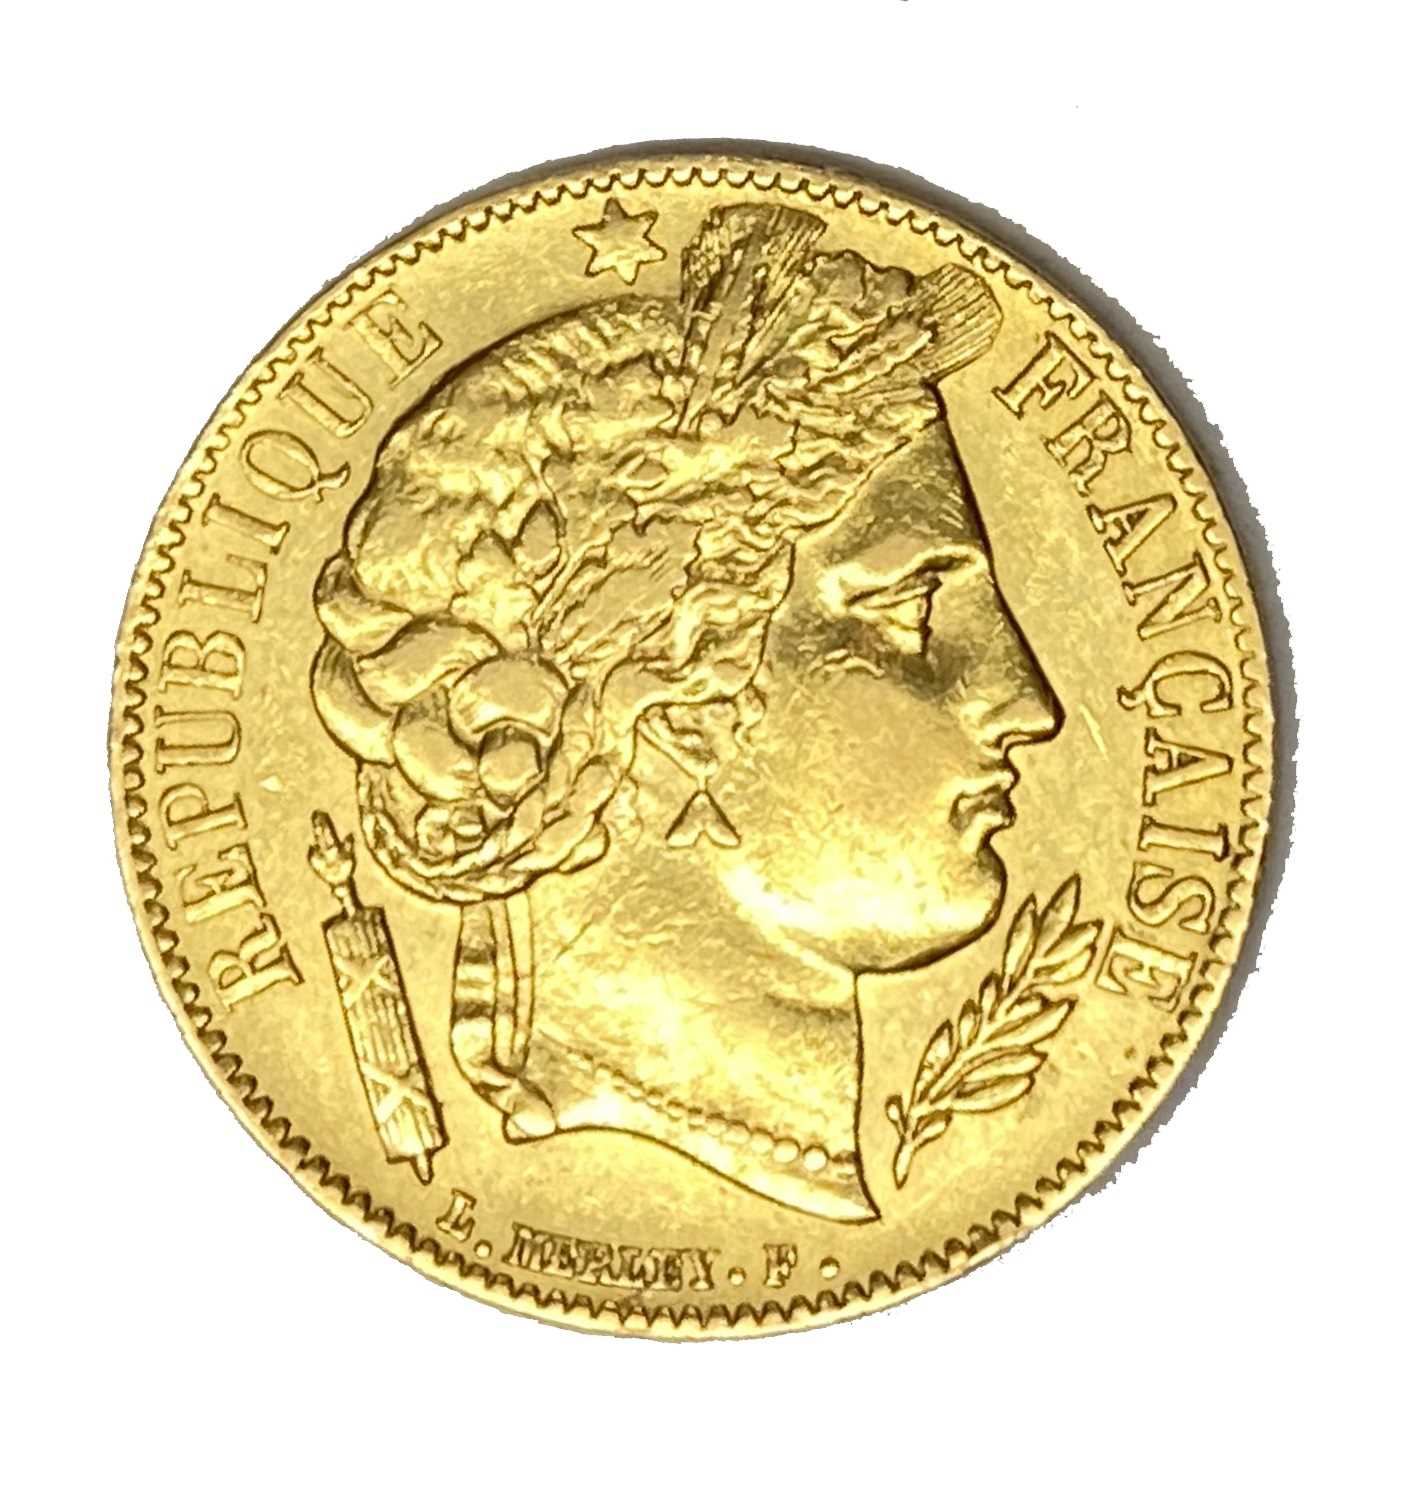 Lot 115 - French Republic 20 Franc gold coin, 1851